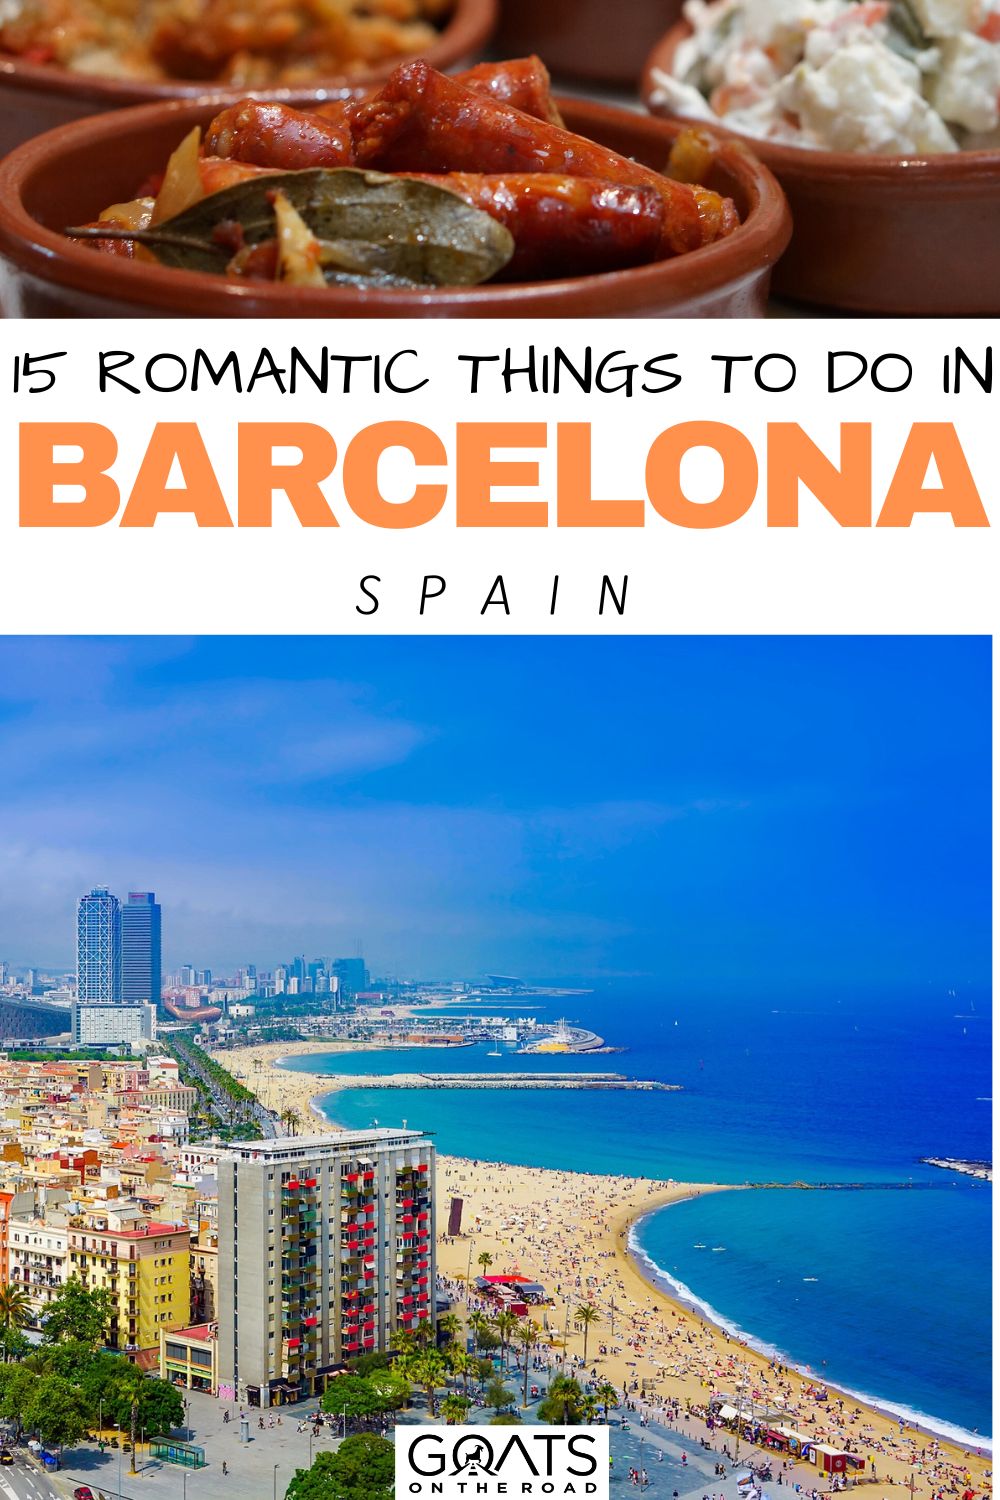 “15 Romantic Things To Do in Barcelona, Spain